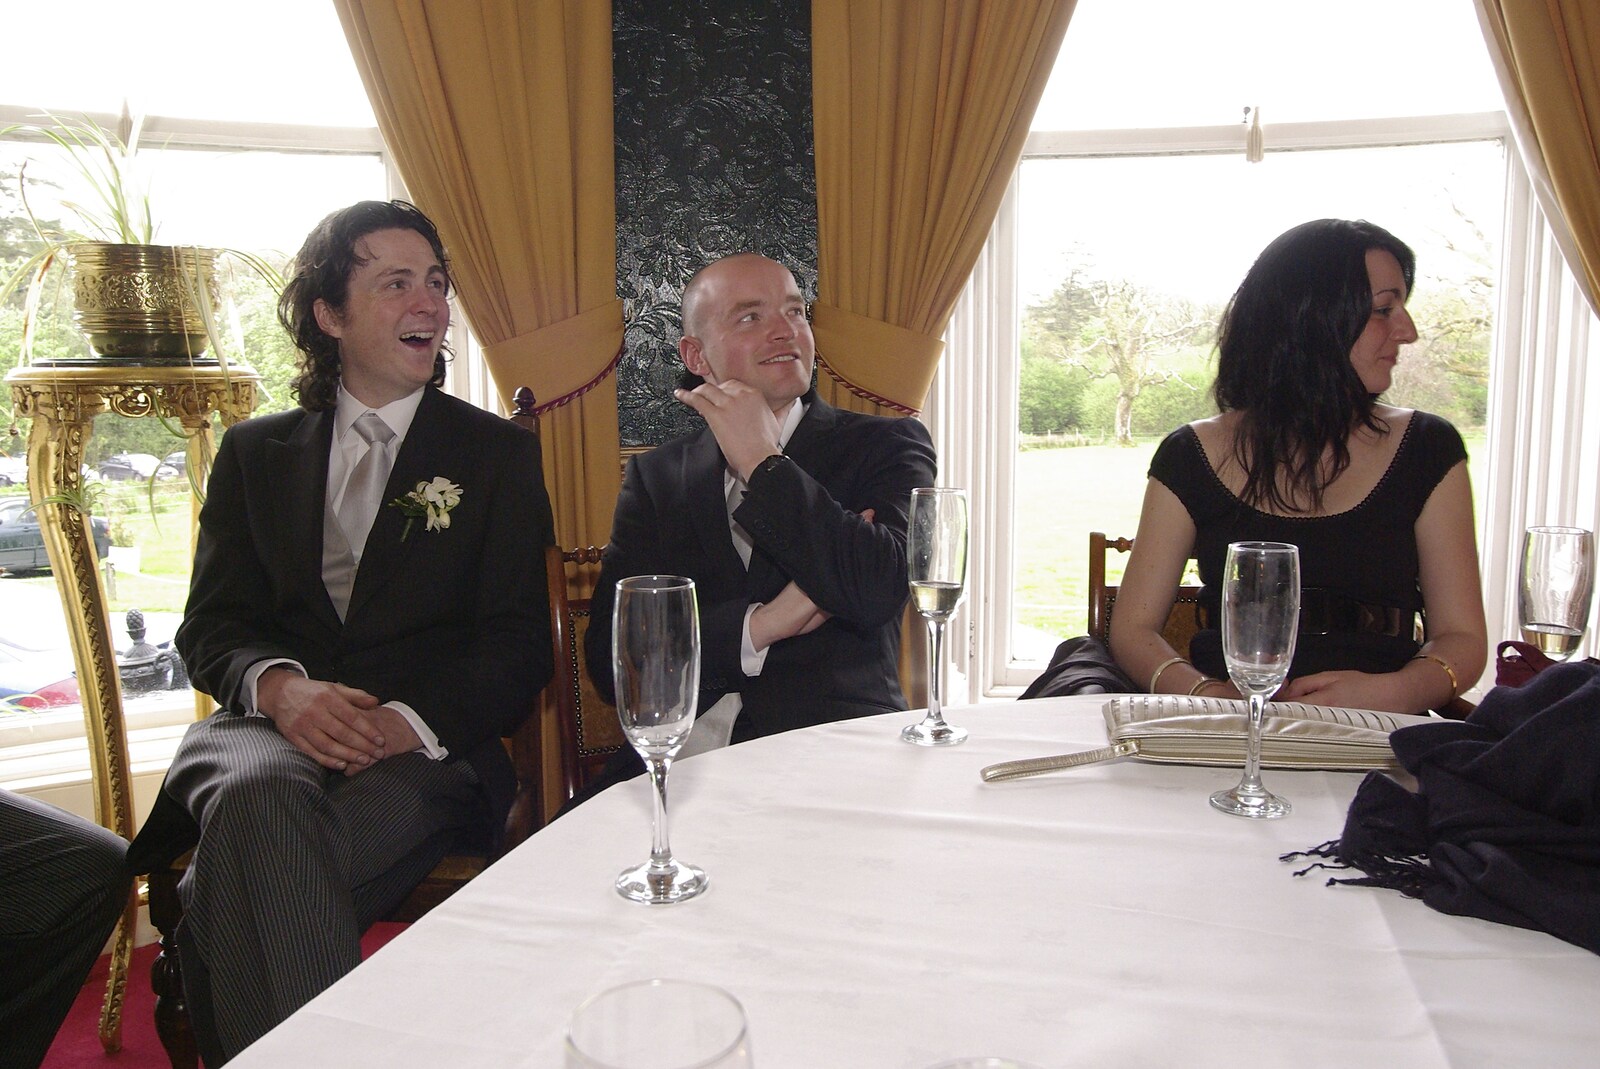 Paul and Jenny's Wedding, Tralee, County Kerry, Ireland - 3rd May 2008: Barry and Gary